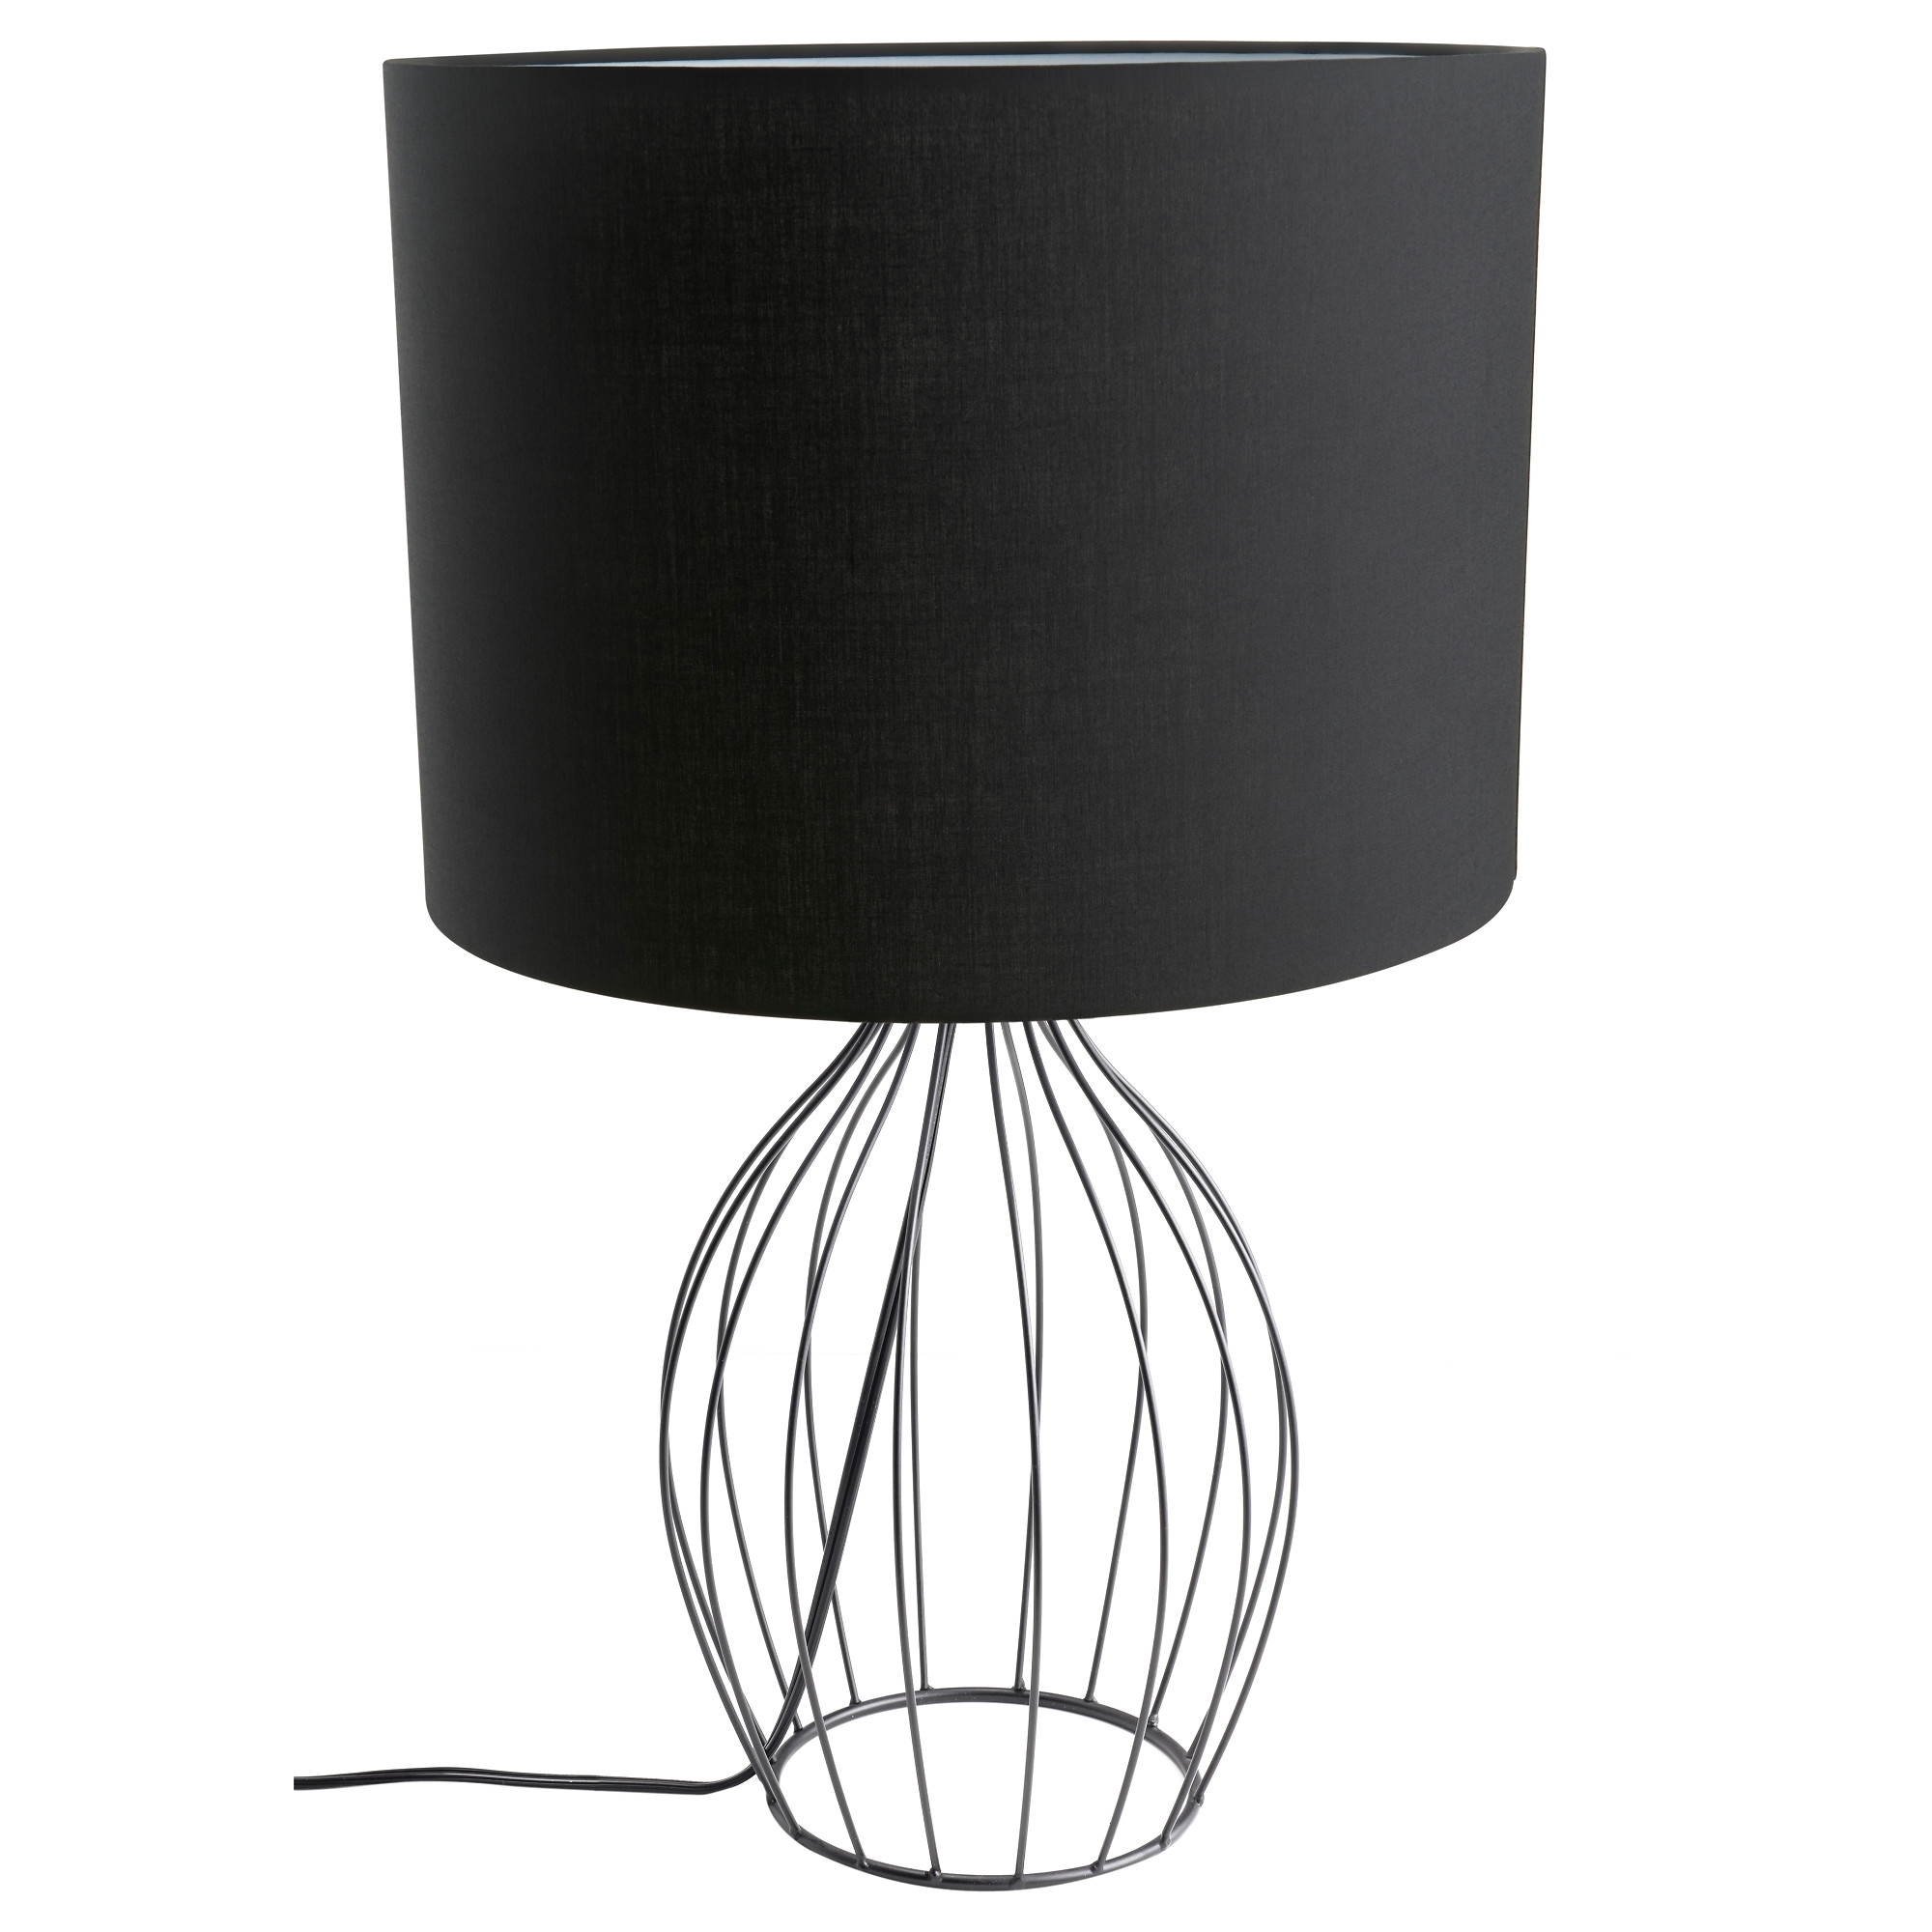 Living Room Table Lamps At Ikea